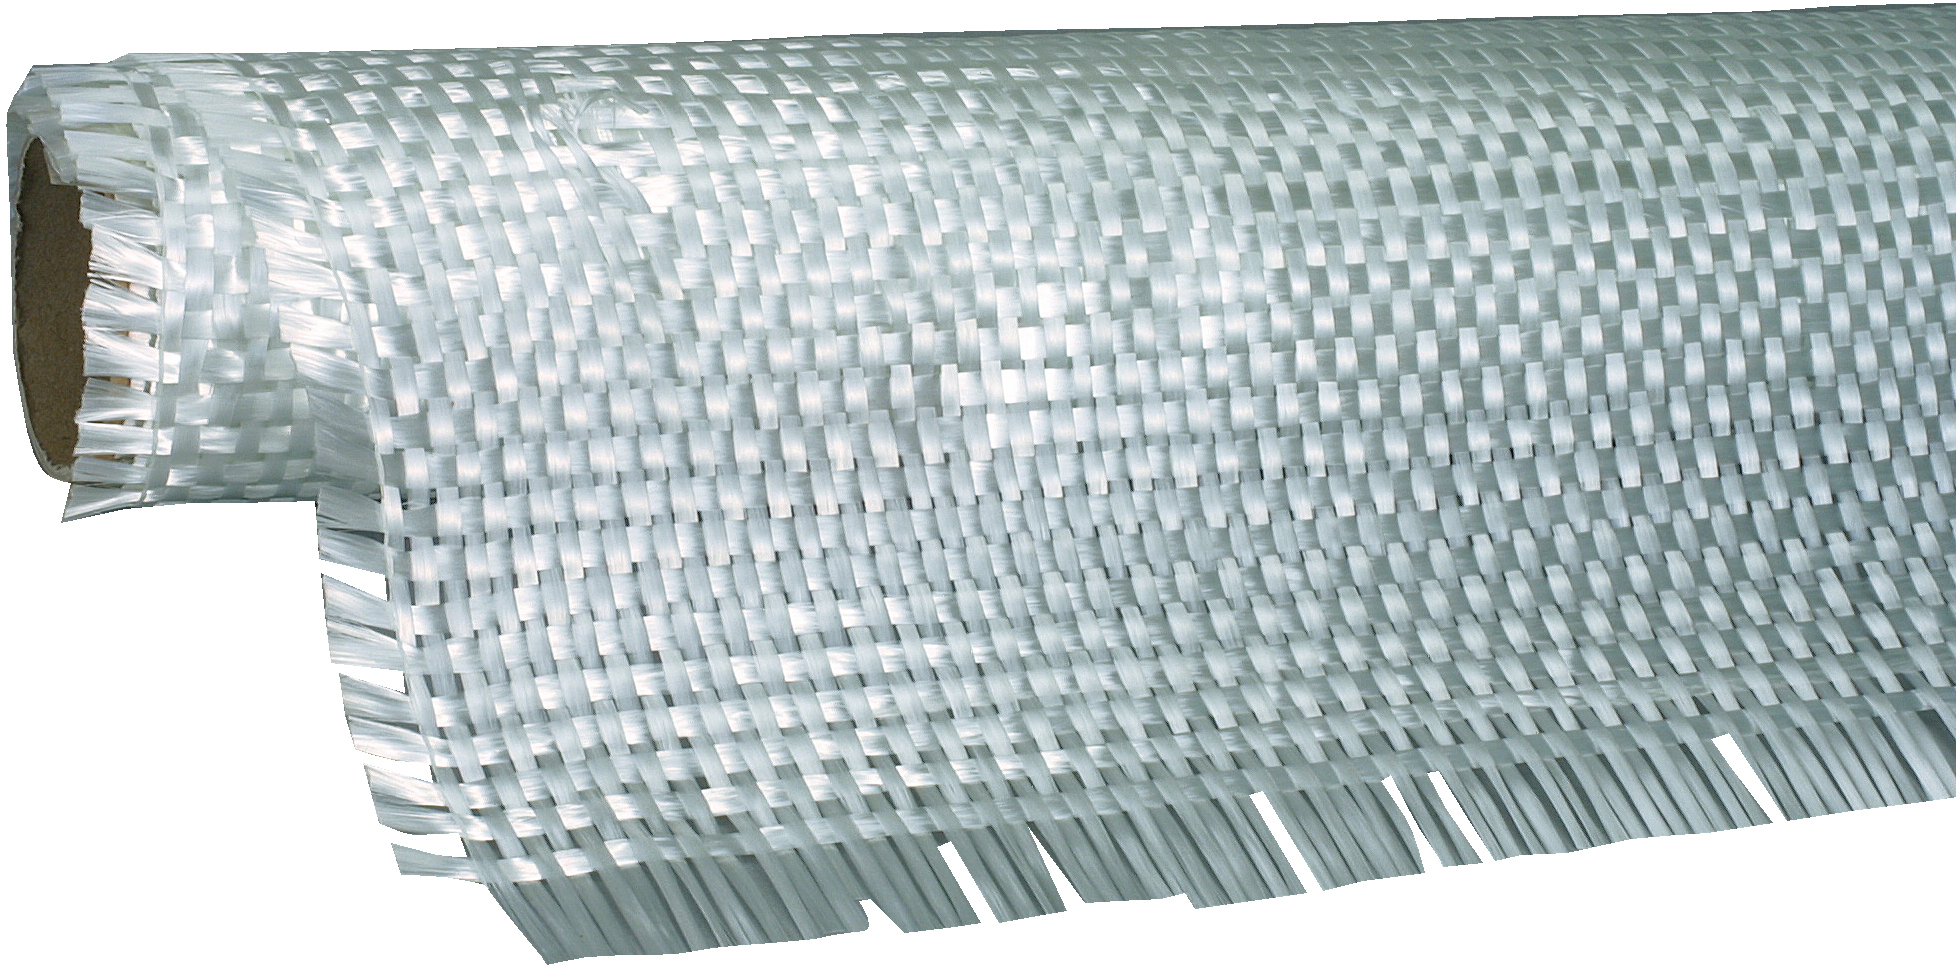 Glassfiber 600 g/m2 Biaxial, metervare